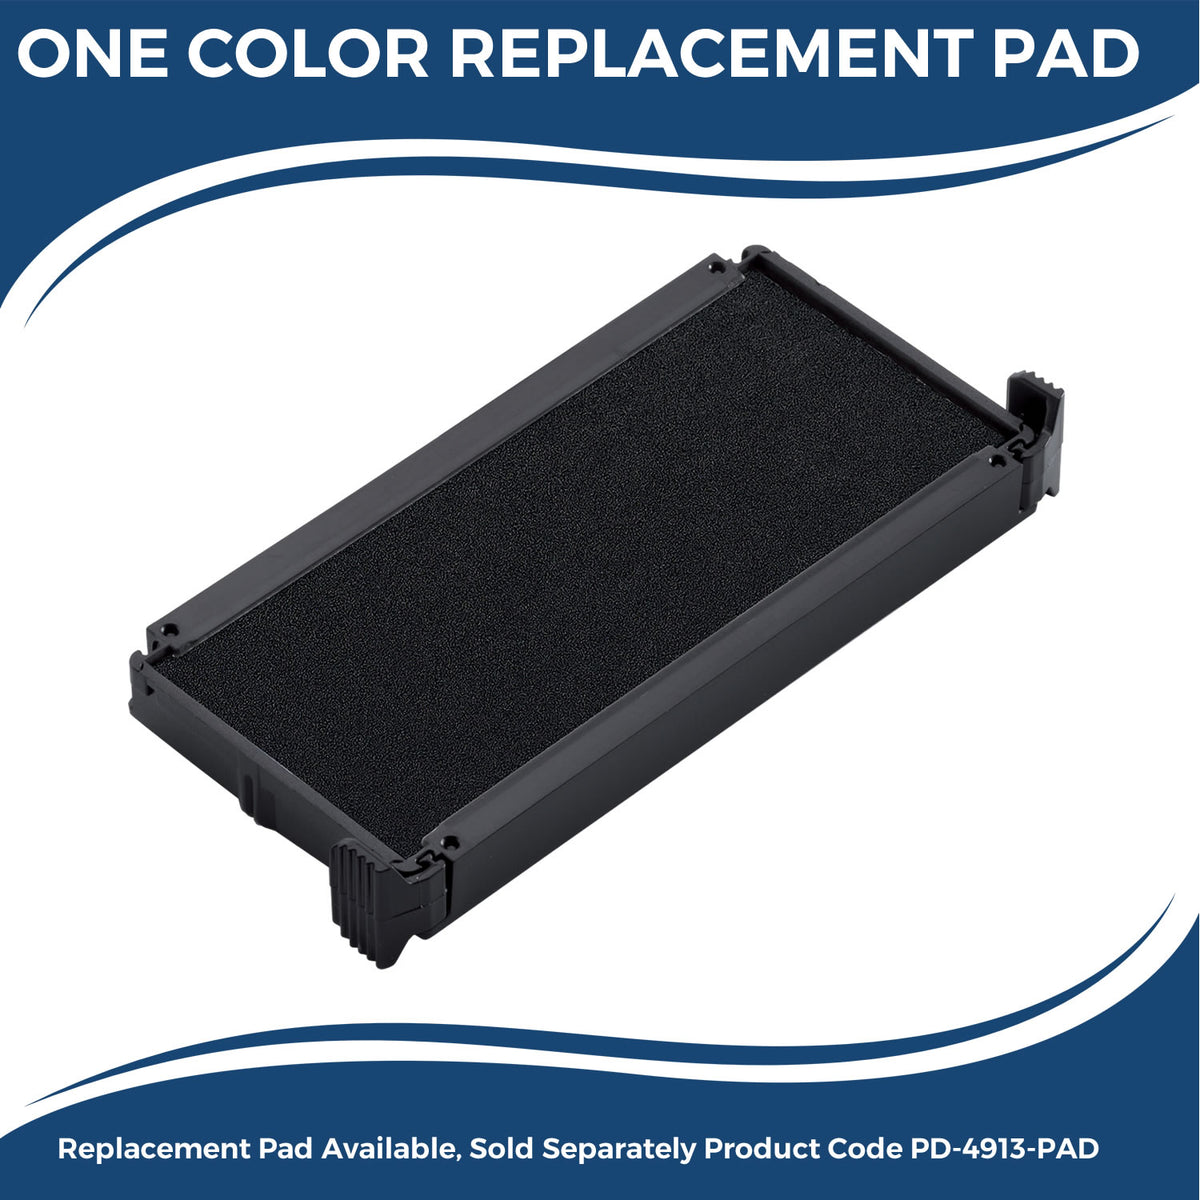 Large Self-Inking Via Aerea Stamp 5522S Large Replacment Pad